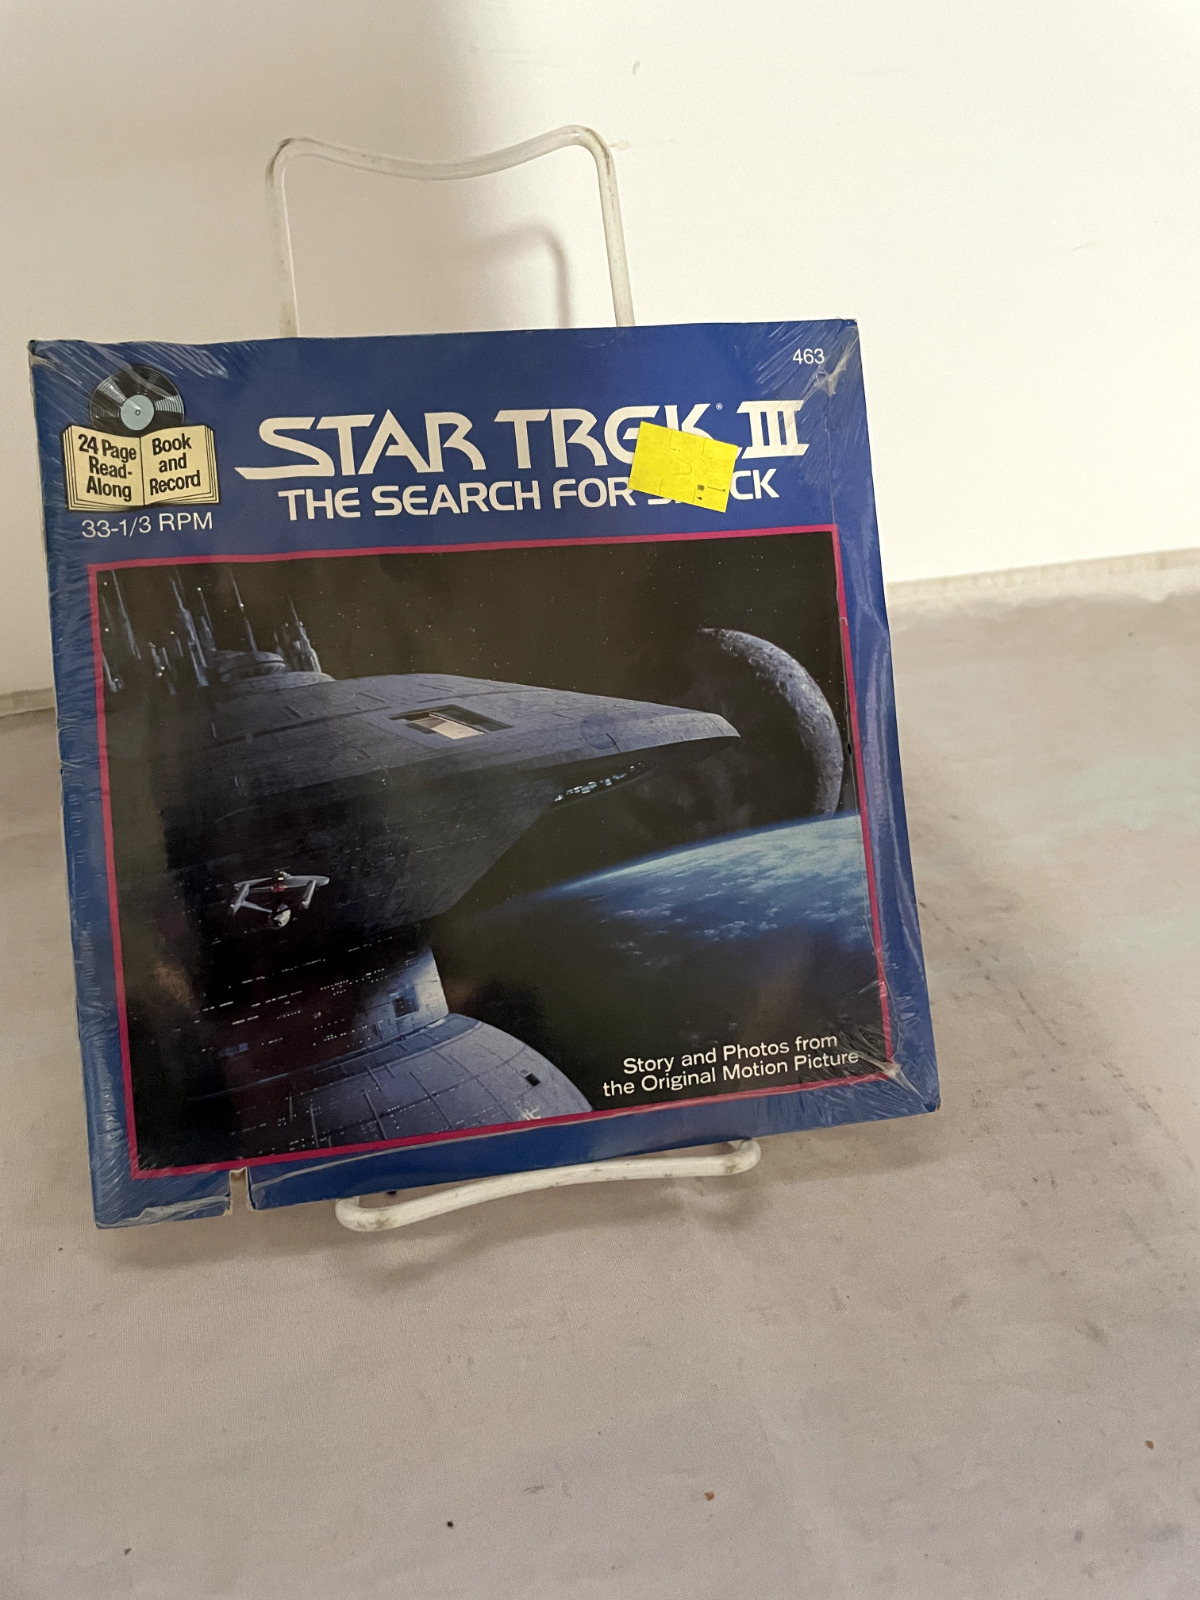 Star Trek III Search For Spock US 24 Page Read-Along Book & 45 Record